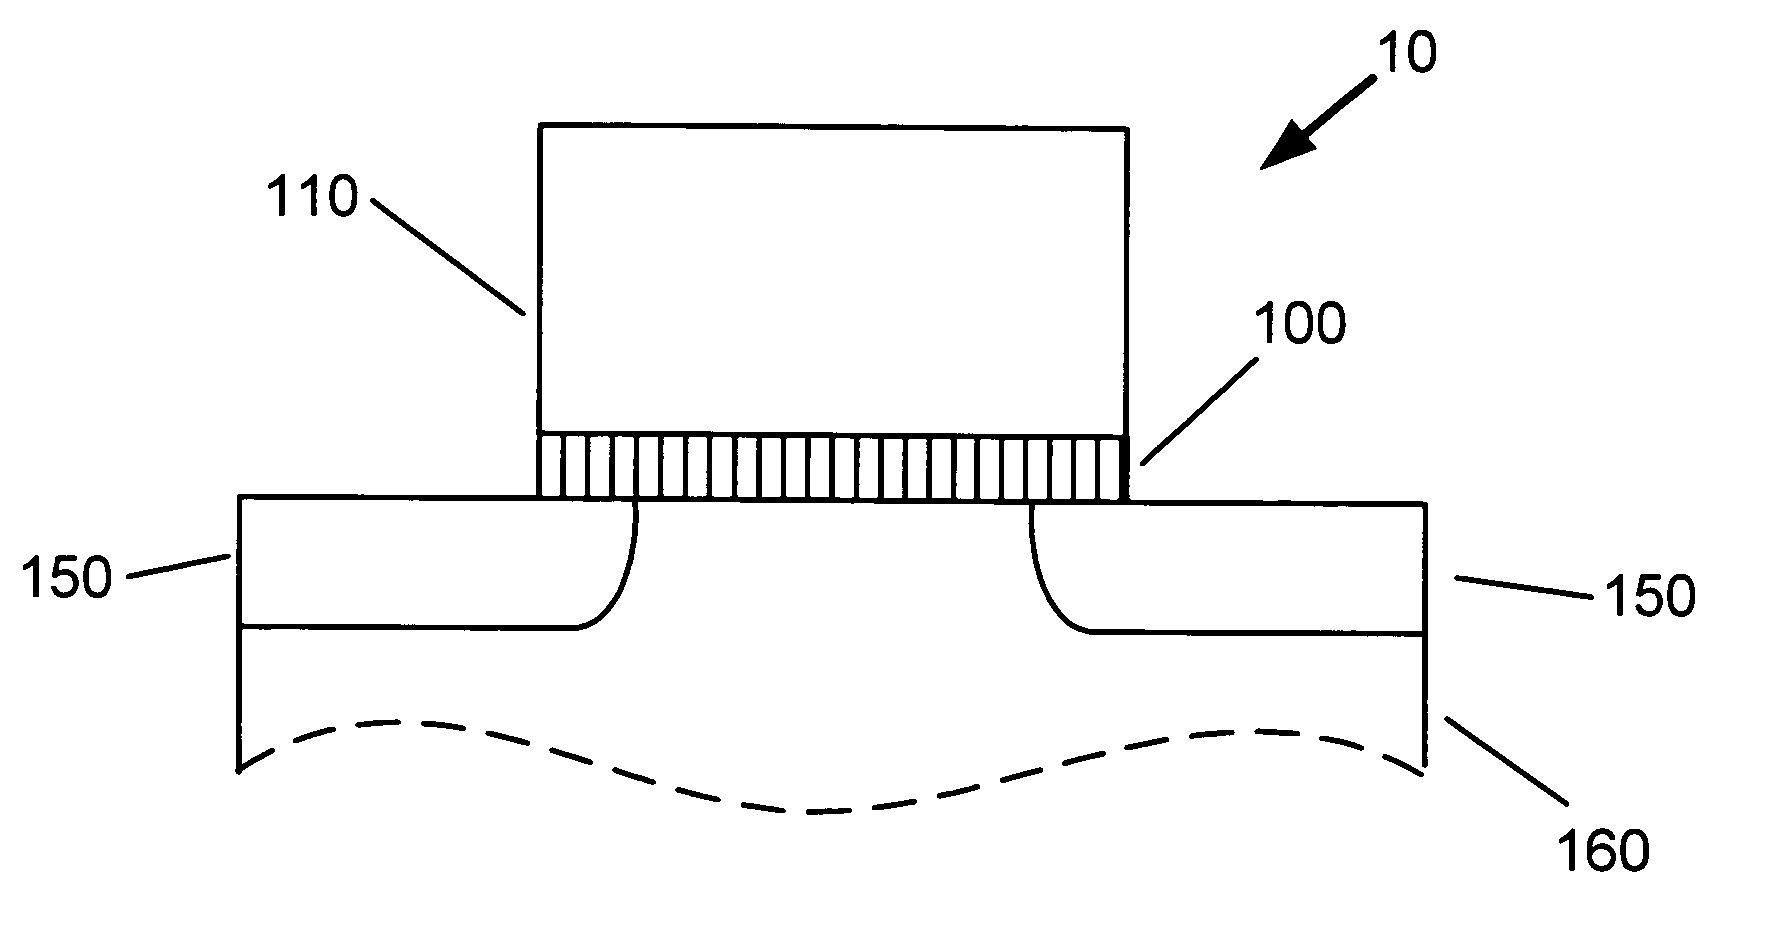 Thin germanium oxynitride gate dielectric for germanium-based devices